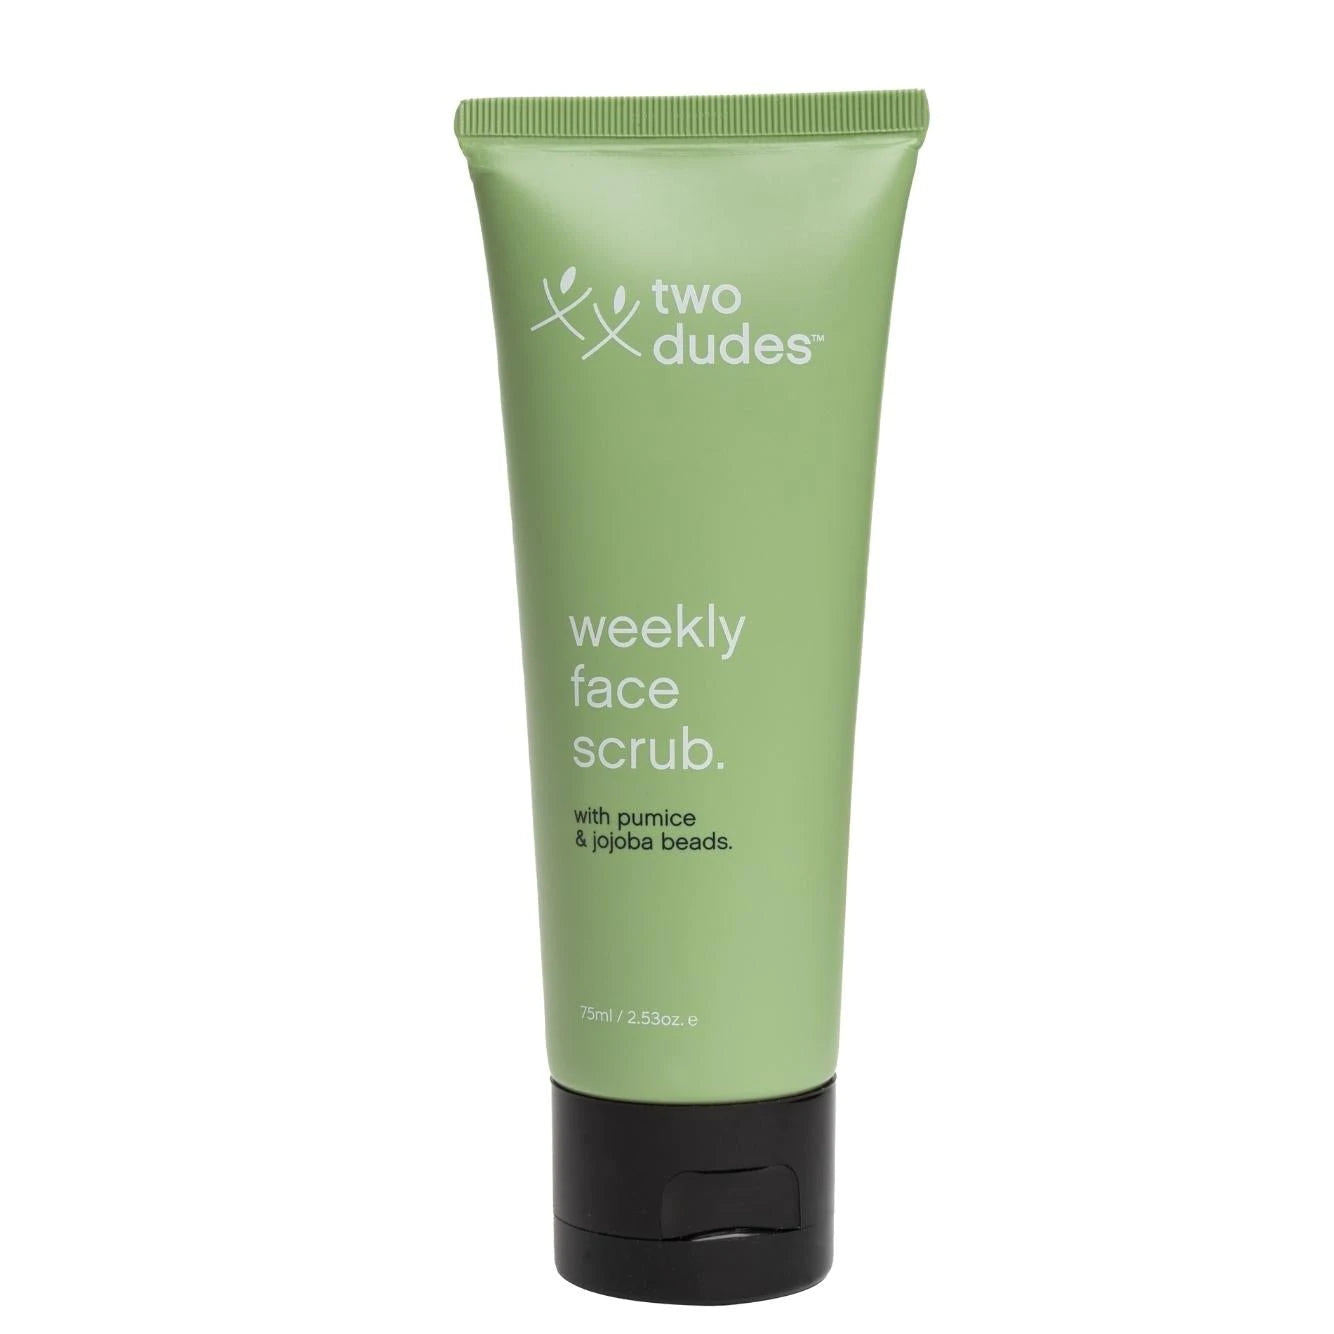 A tube of "His" weekly face scrub in a light green tube with pumice and jojoba beads, 75ml size, part of a giftbox co. New Zealand giftbox, shown